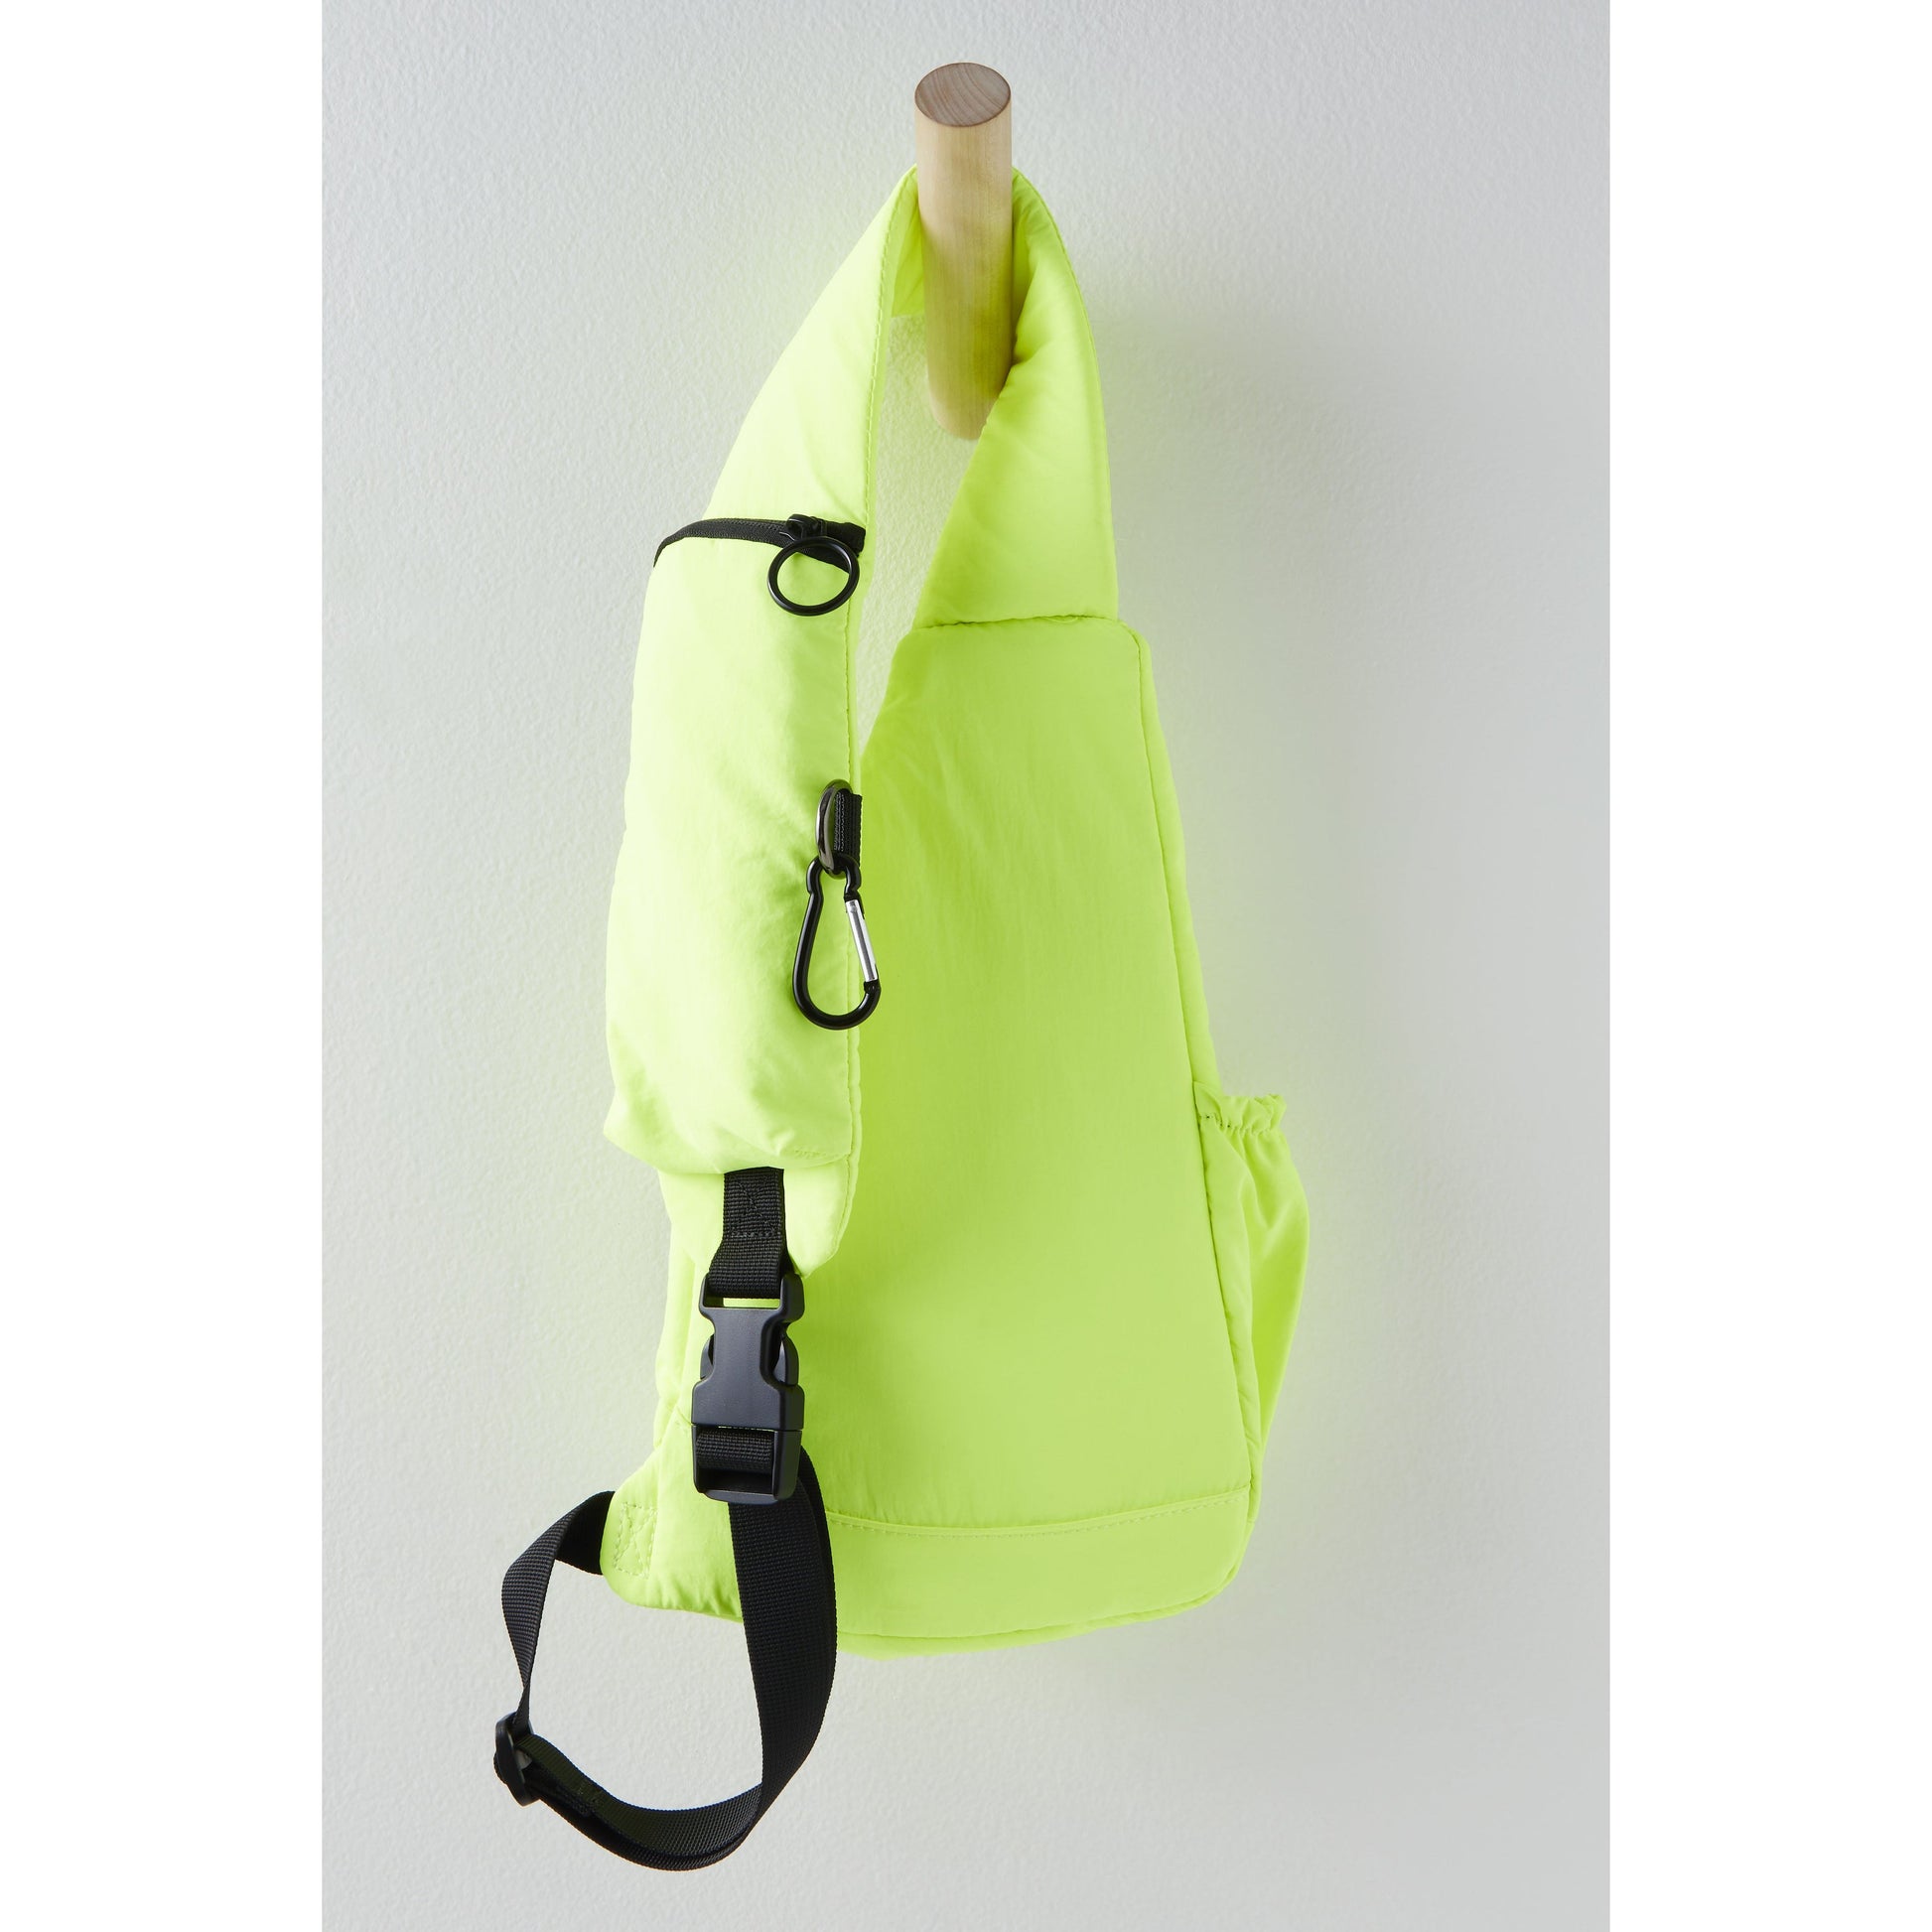 Neon green Renegade Sling bag with a black adjustable crossbody strap and carabiner, hanging on a wooden peg against a white background by Free People Movement.